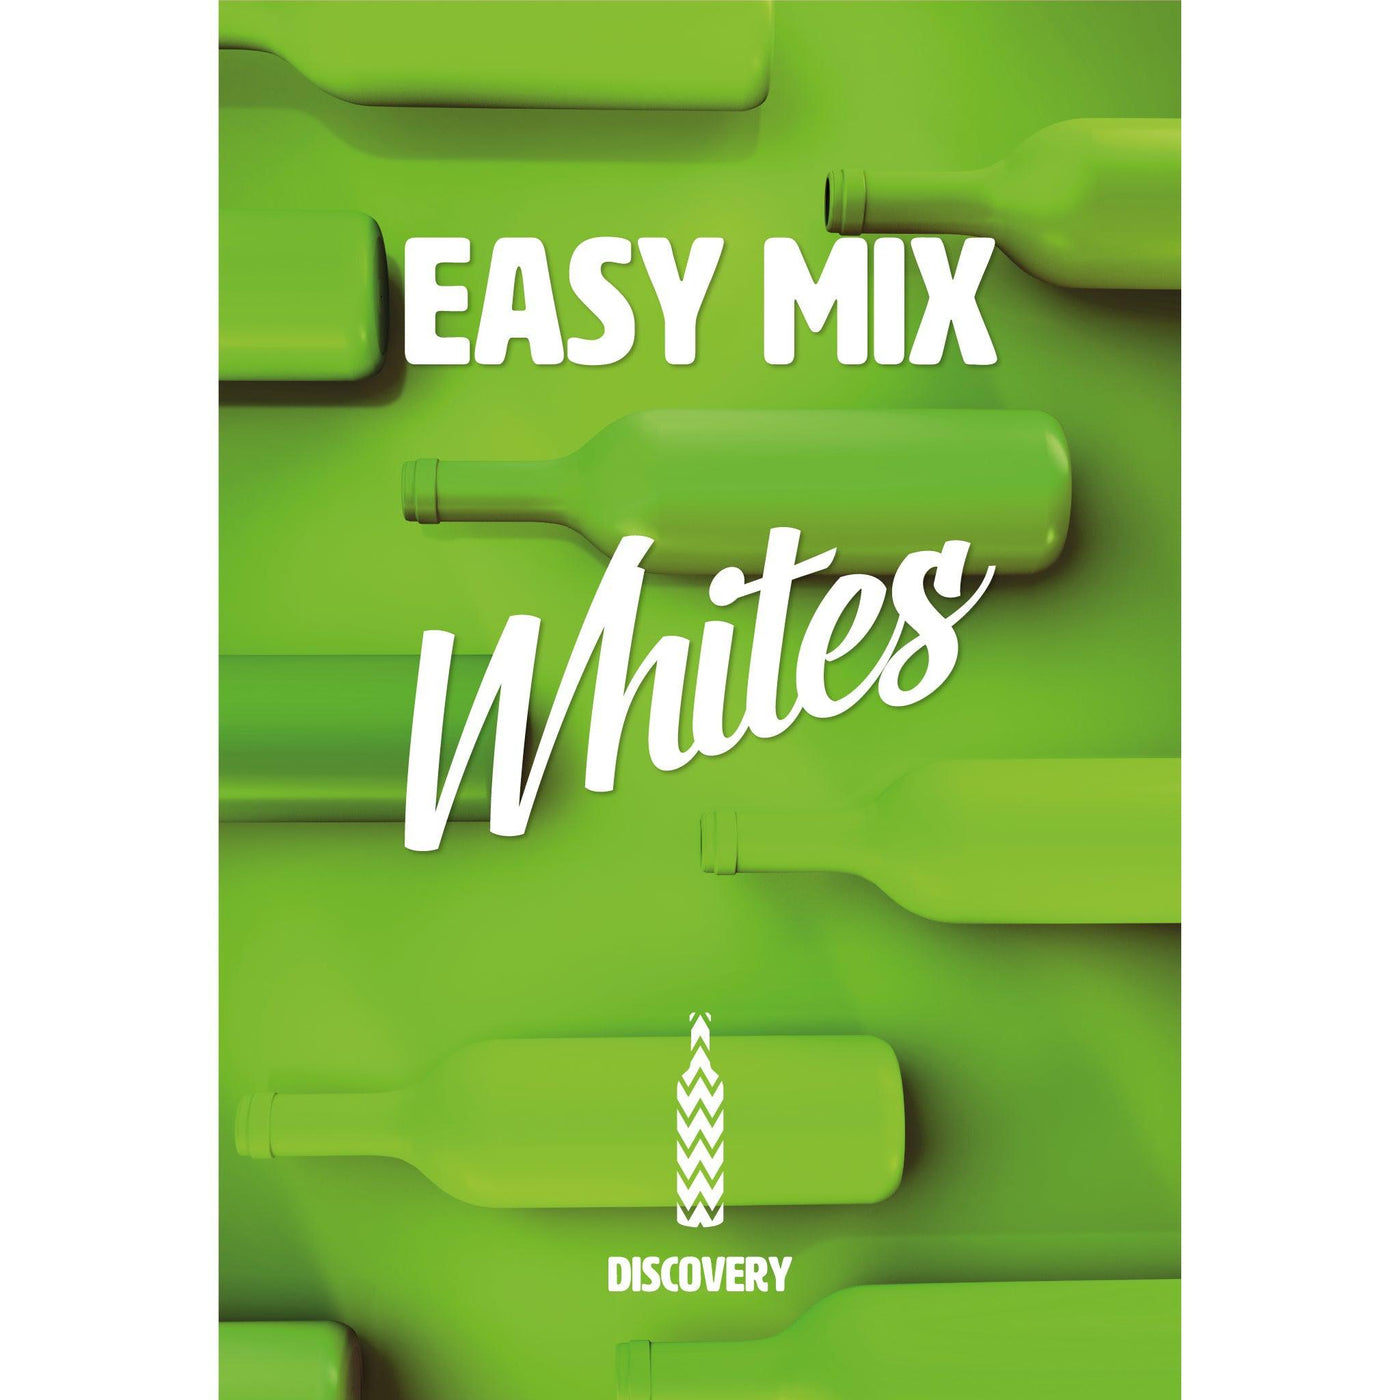 Easy Mix White Discovery Case